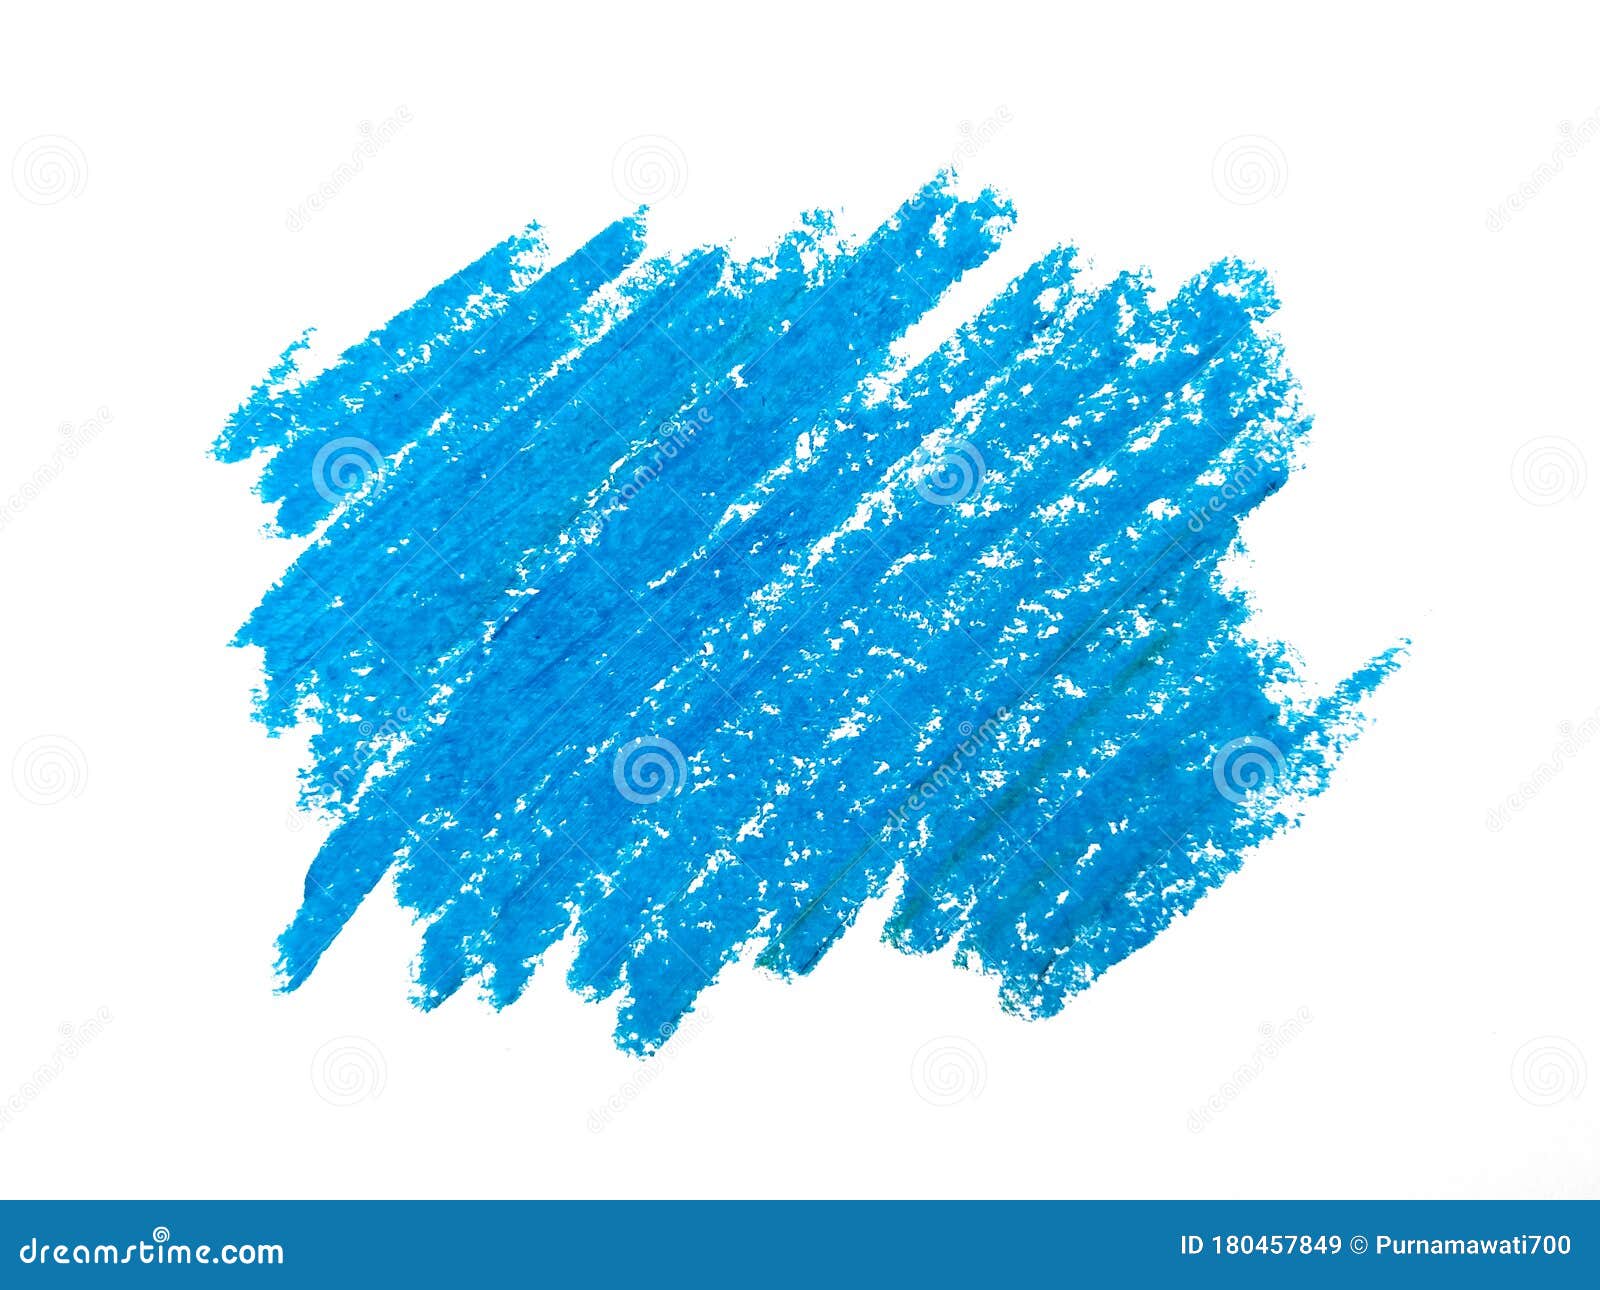 abstract crayon on white background. blue crayon scribble texture. wax pastel spot.